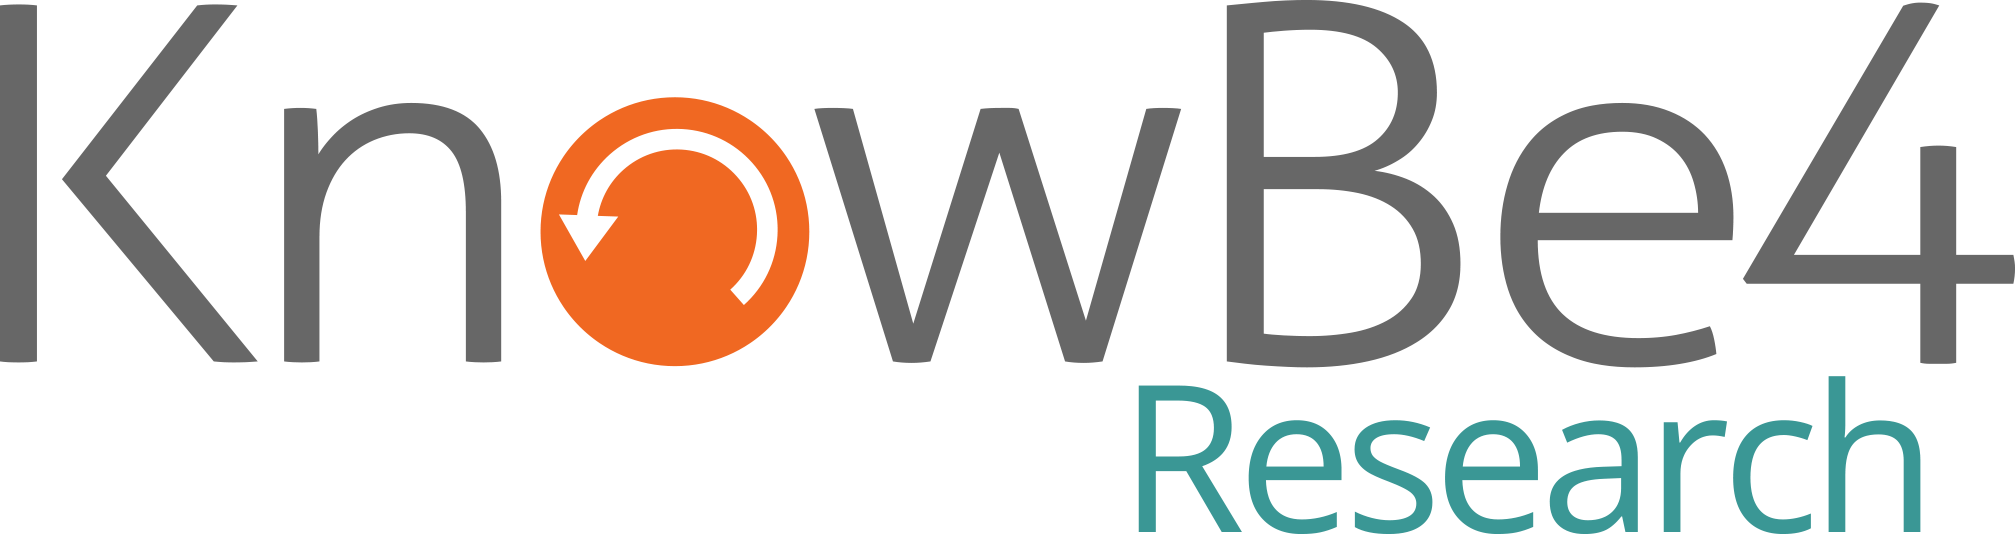 KnowBe4-Research-Logo